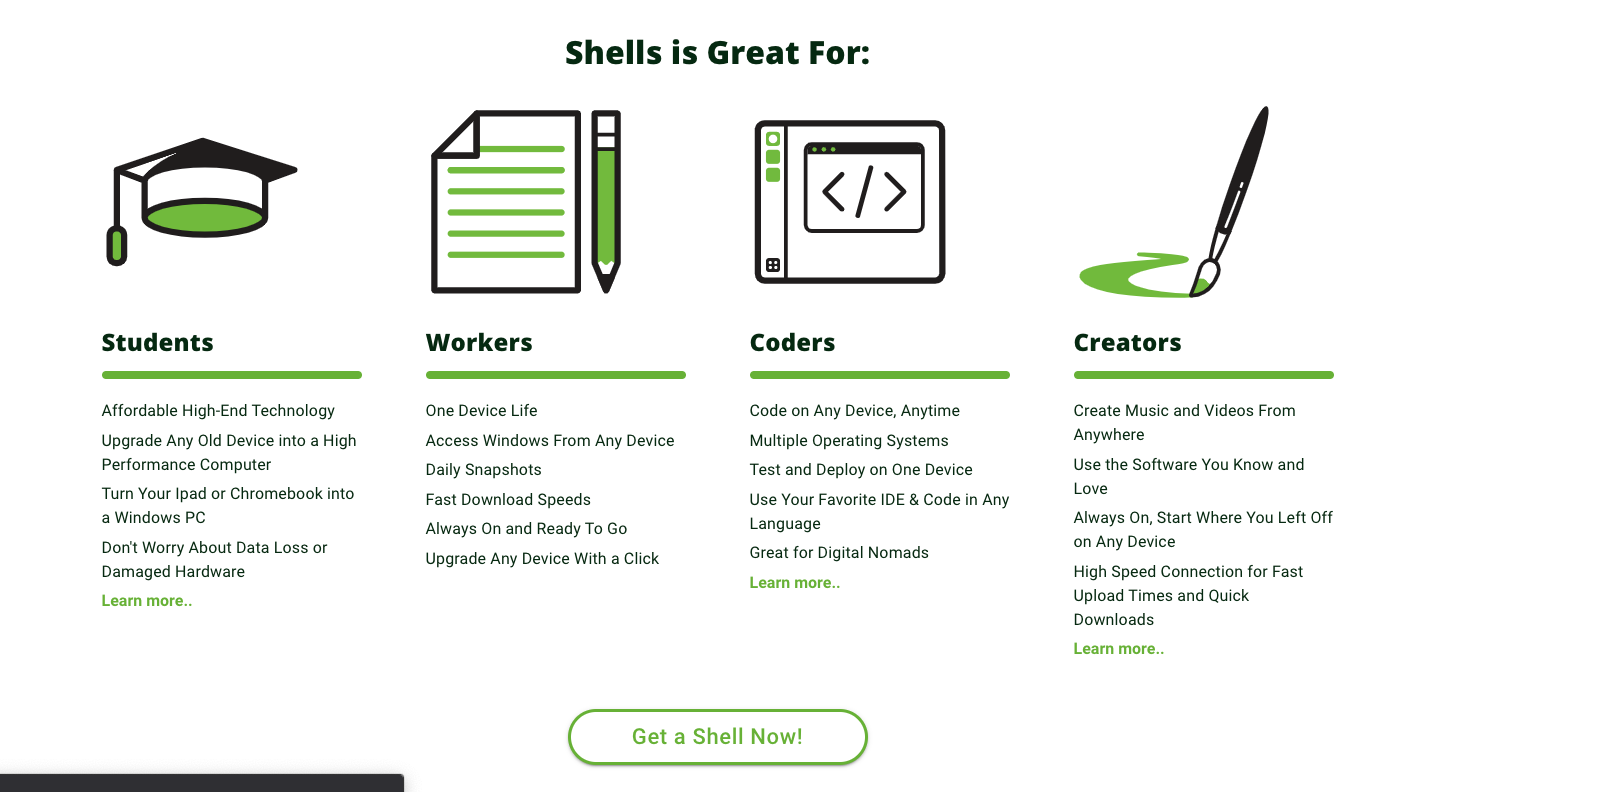 Get feedback from a vast remote working audience about Shells.com